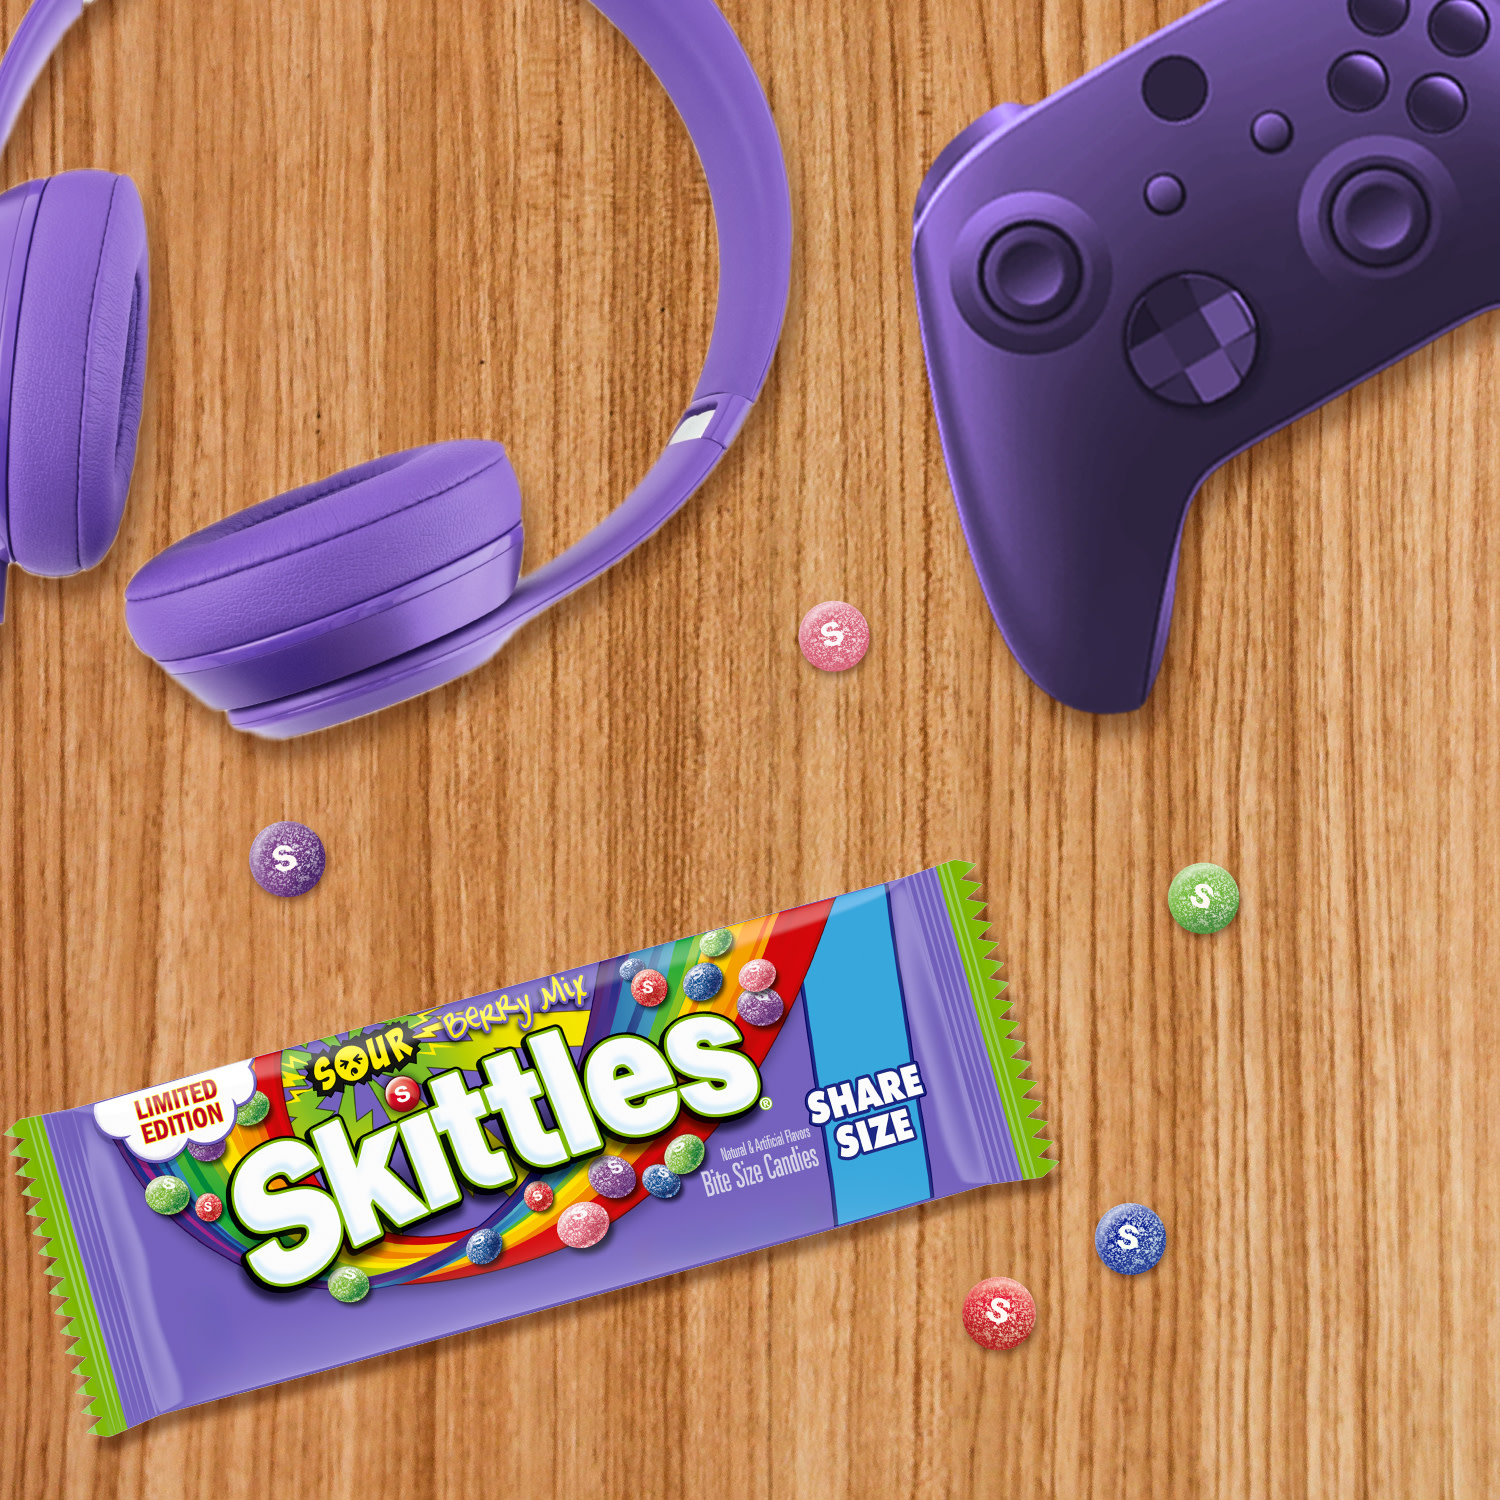 Skittles Sour Berry Limited Edition Chewy Candy, Sharing Size - 3.3 oz Bag - image 5 of 13